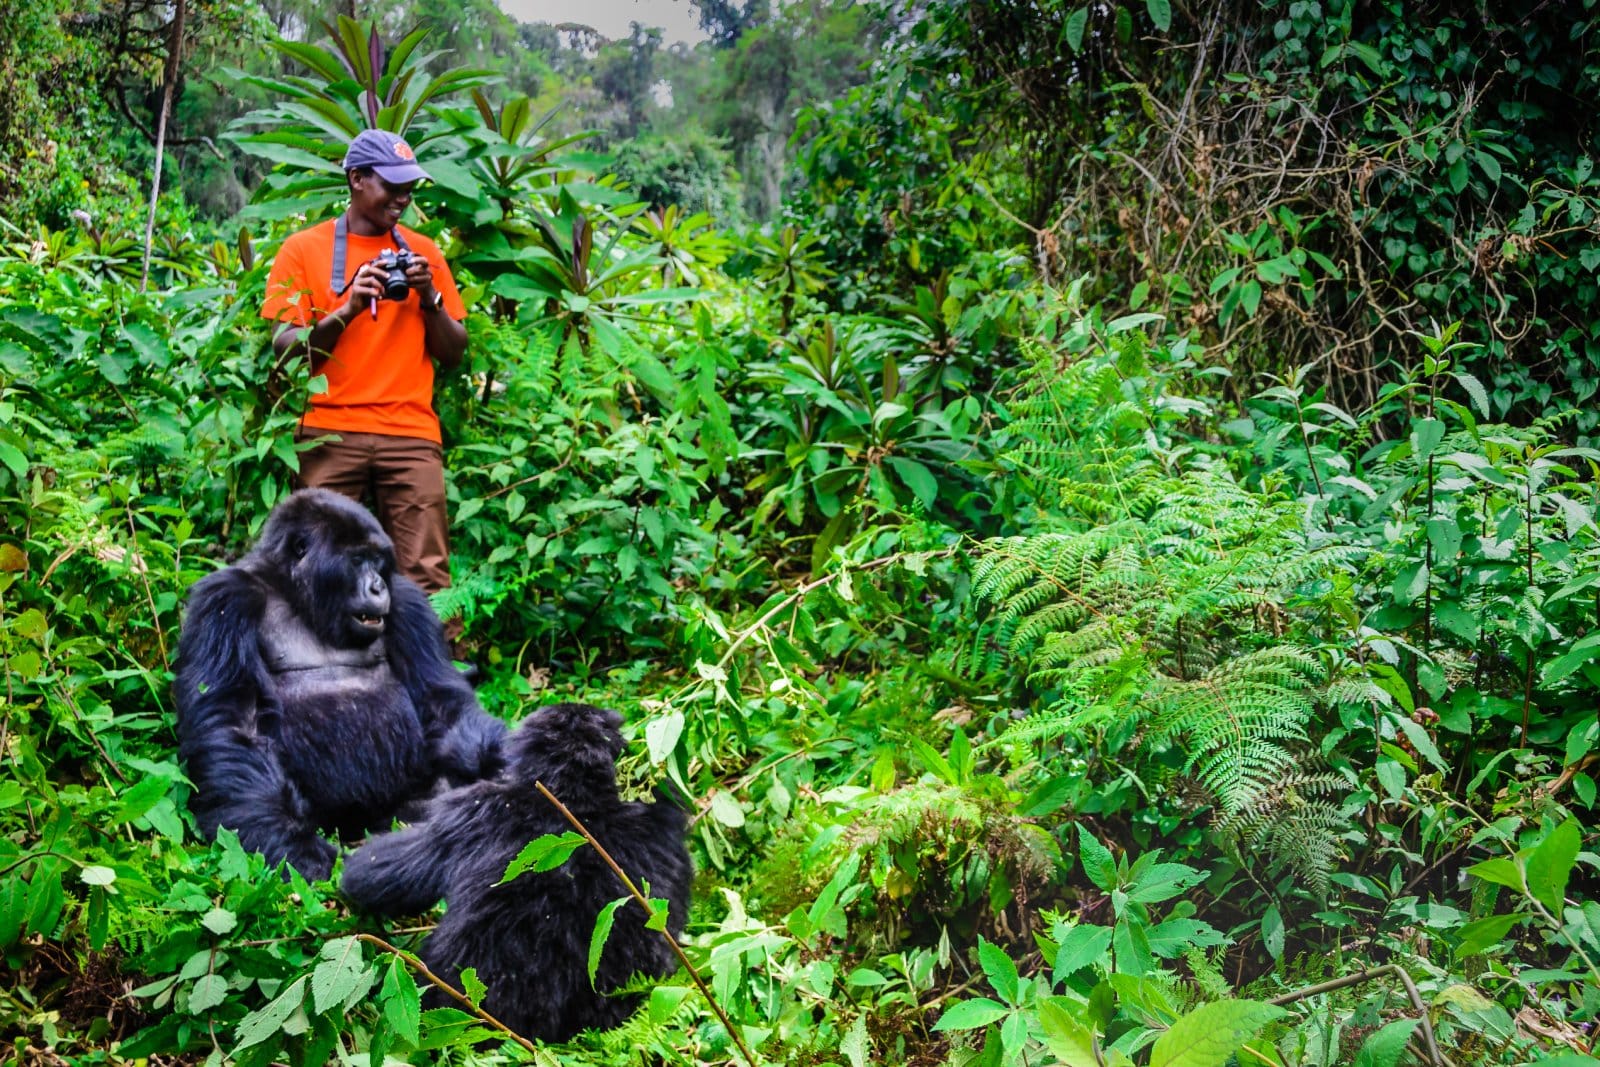 <p class="wp-caption-text">Image Credit: Shutterstock / Tetyana Dotsenko</p>  <p><span>Gorilla trekking in Rwanda’s Volcanoes National Park offers an intimate glimpse into the world of the mountain gorillas in their natural habitat. This rare and profound experience involves trekking through the dense forests of the Virunga Mountains to observe these majestic creatures at close range. The encounter with gorillas is a thrilling adventure and a poignant reminder of the fragility of our natural world and the importance of conservation efforts to protect these endangered species.</span></p>